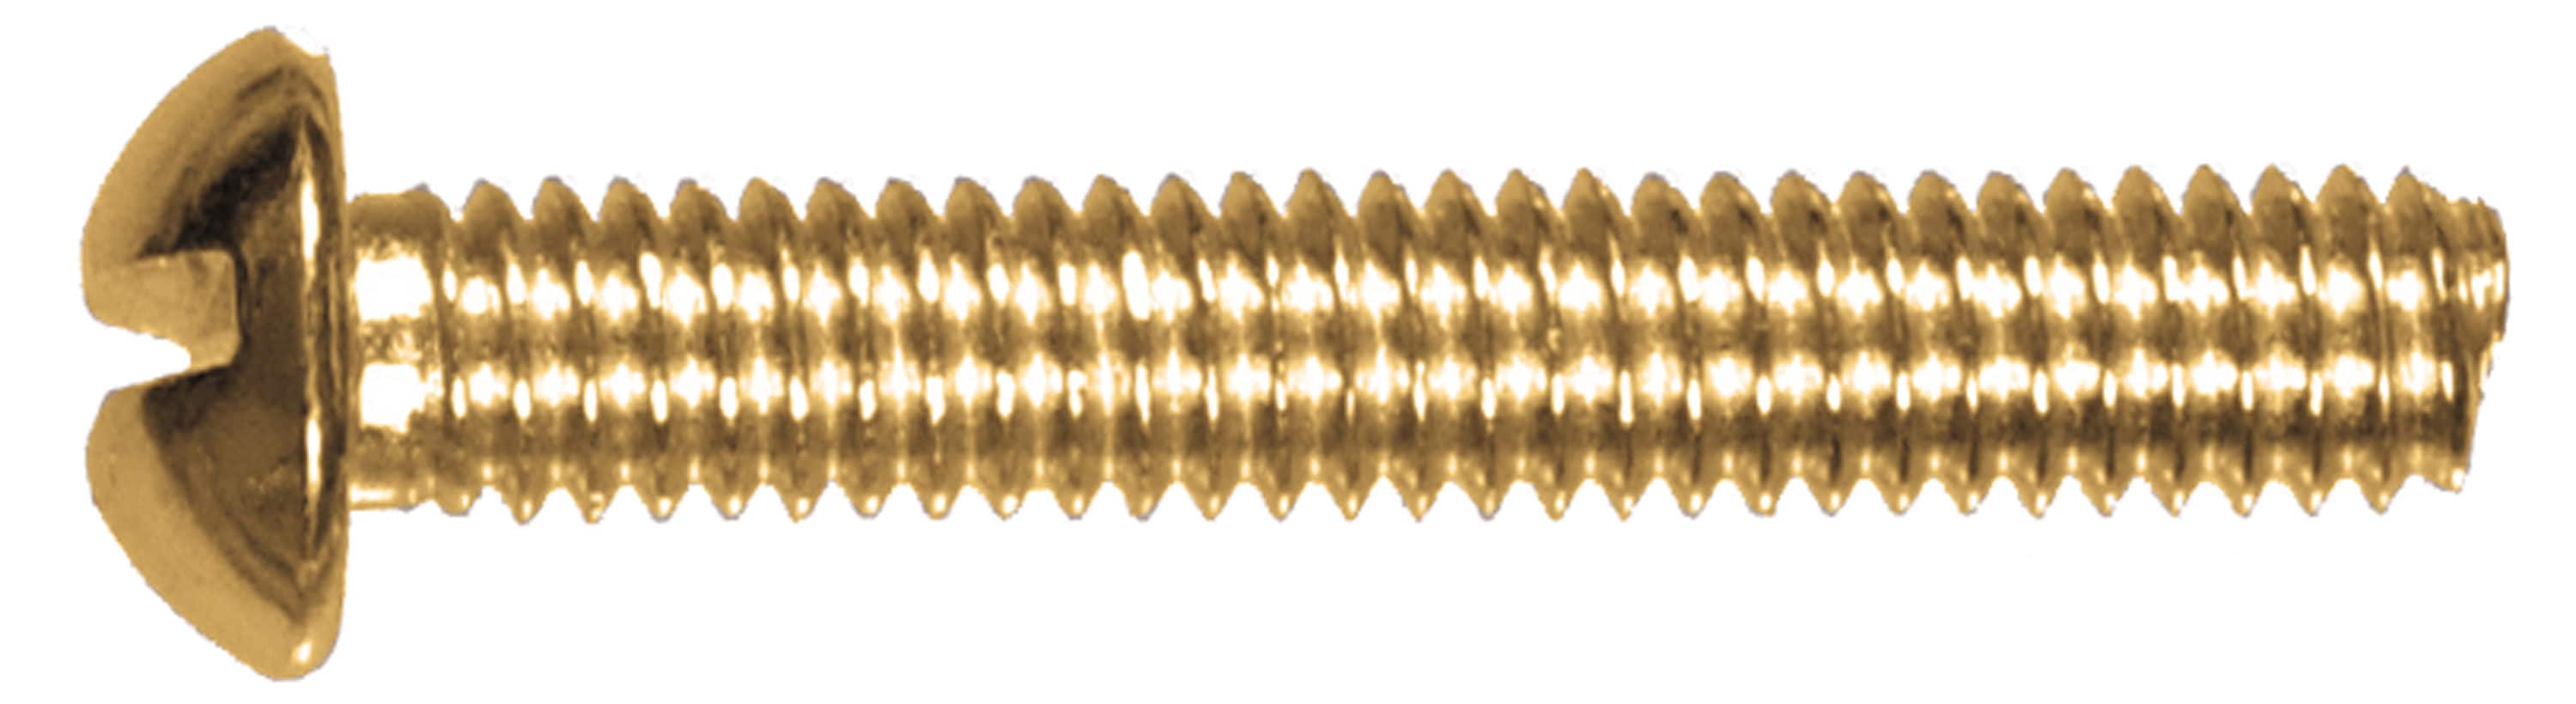 #4/40 X 3/16" SLOTTED FLAT HEAD SBH BRASS MACHINE SCREWS-25 COUNT FOR SLOT CARS 